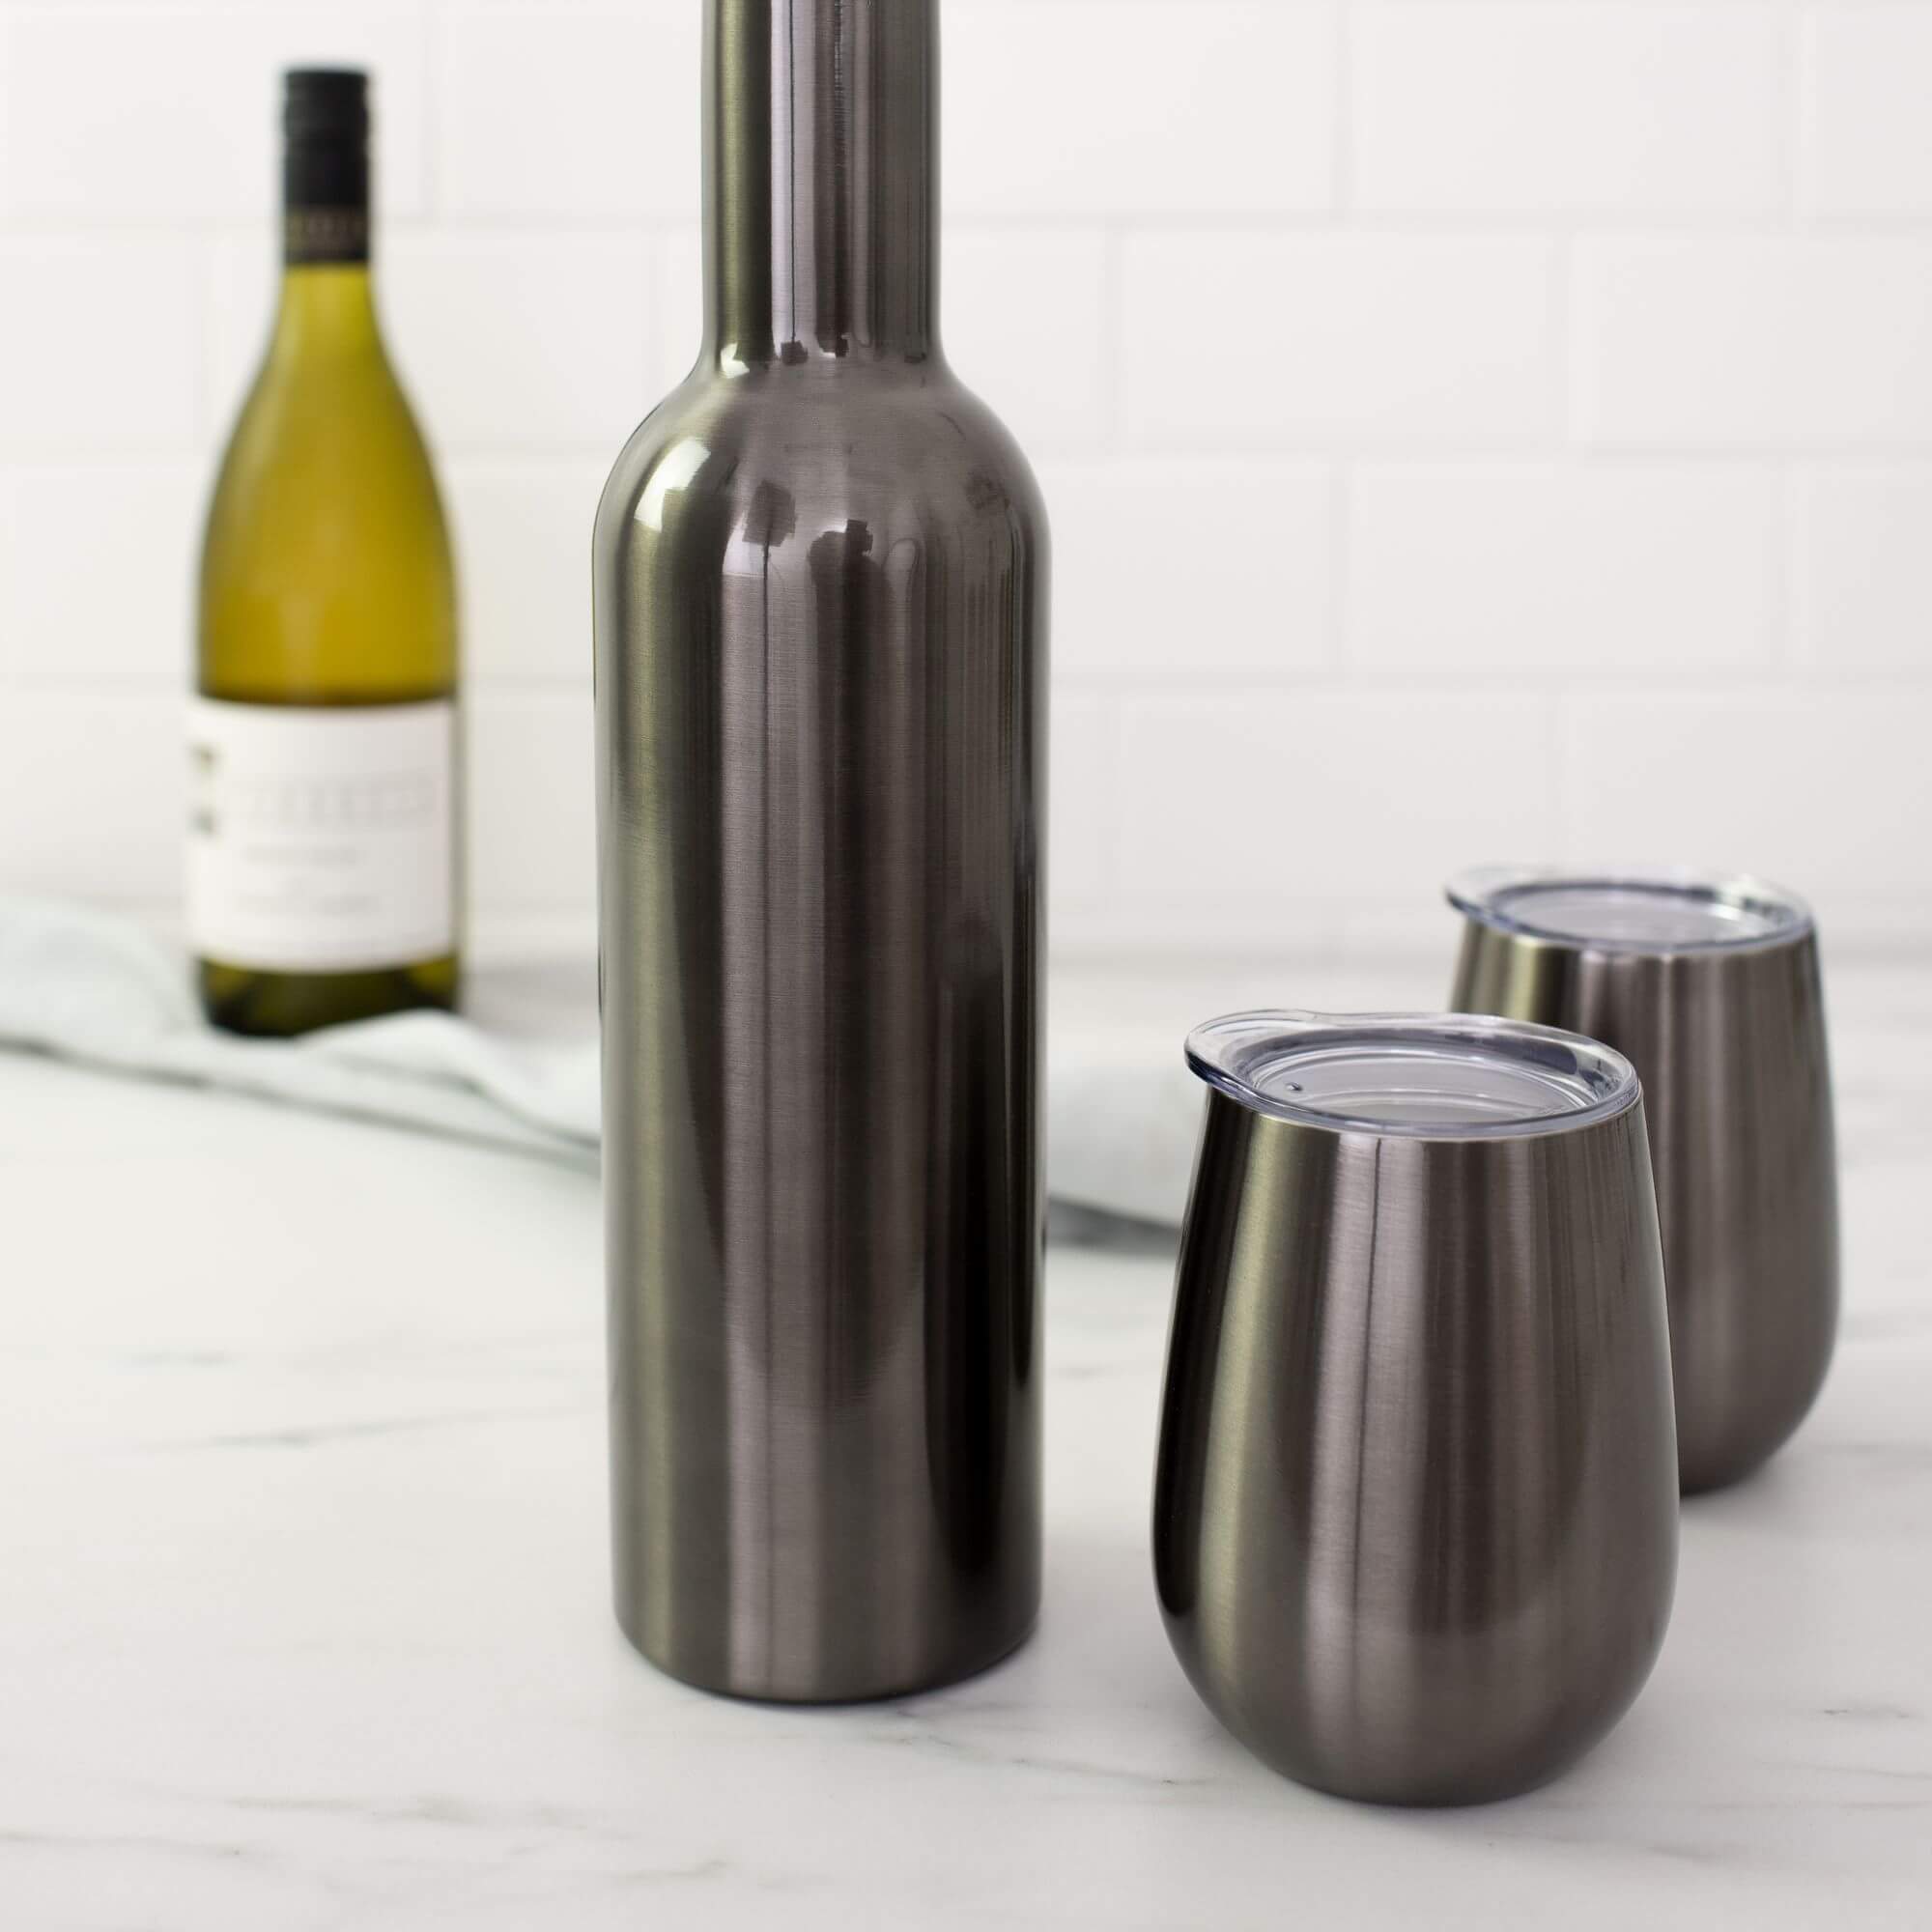 Two insulated wine glasses and an insulated wine bottle on a kitchen bench